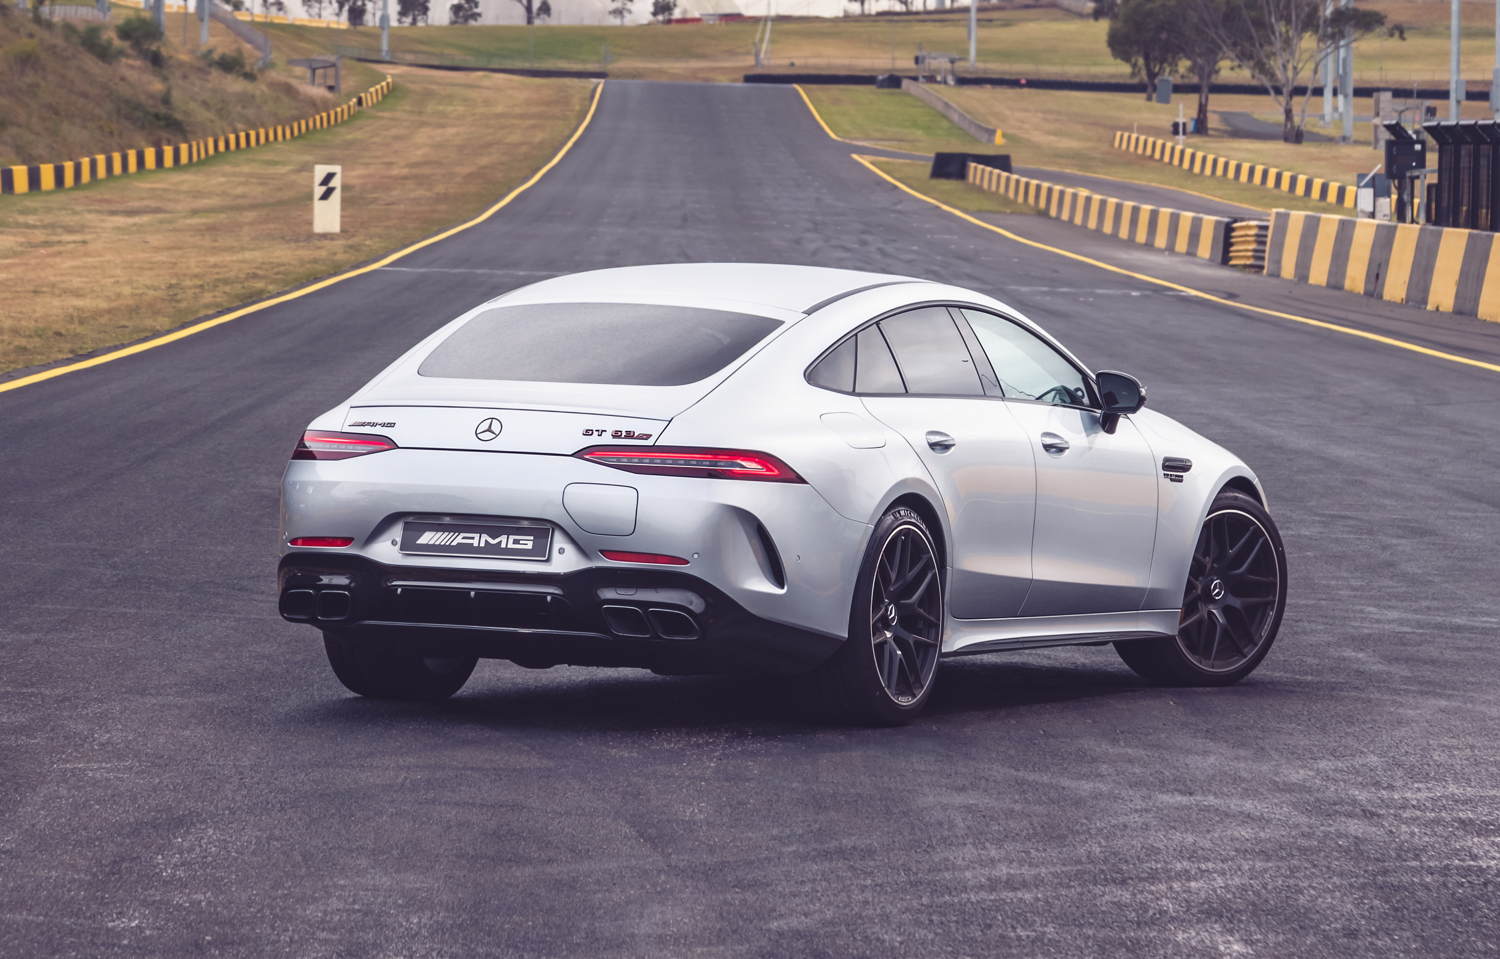 aria-label="Mercedes AMG GT 63 S Performance 4"